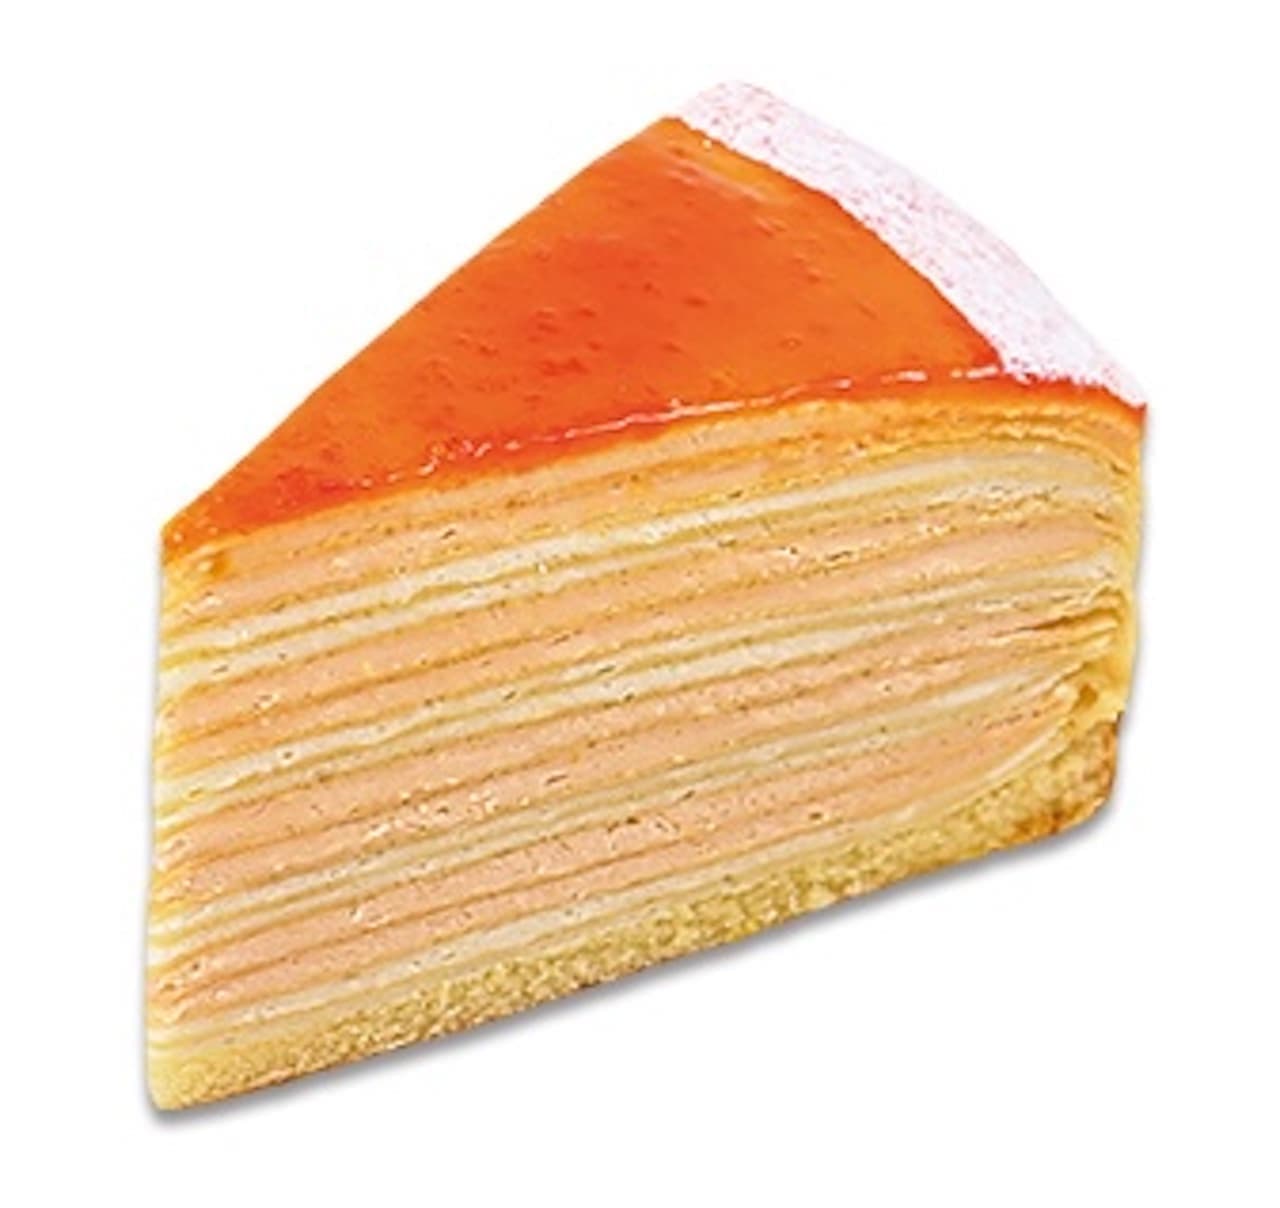 Fujiya "Mille Crepe with Mentha from Ehime".